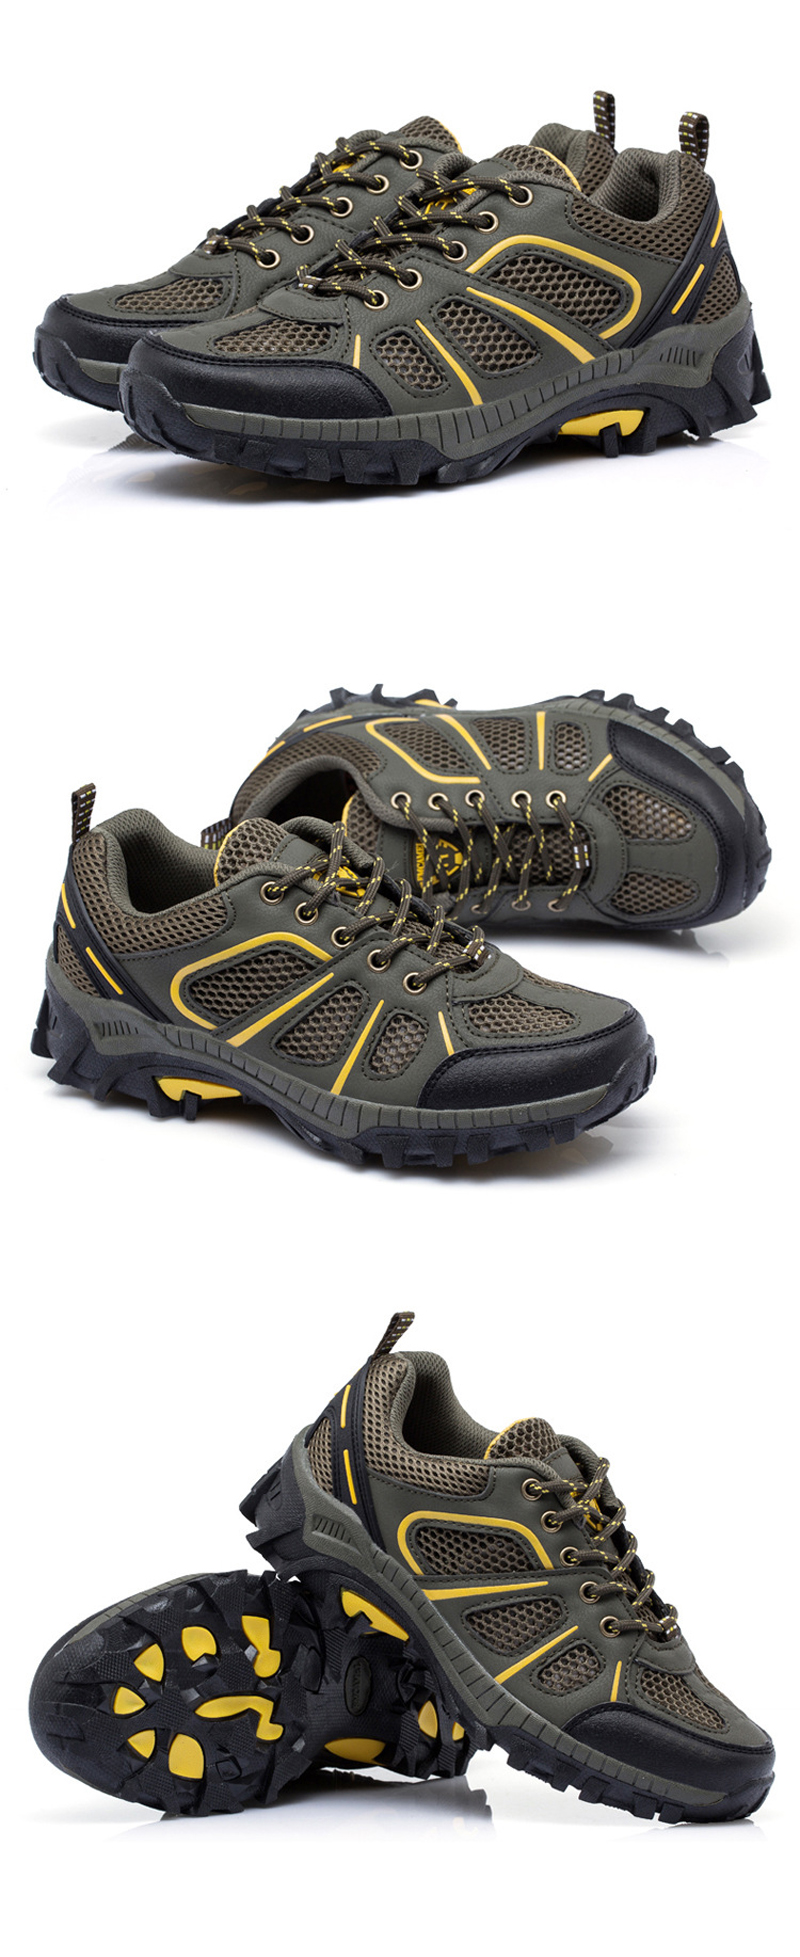 Men-Outdoor-Sports-Anti-skid-Breathable-Mesh-Hiking-Climbing-Shoes-Running-Sneakers-1323860